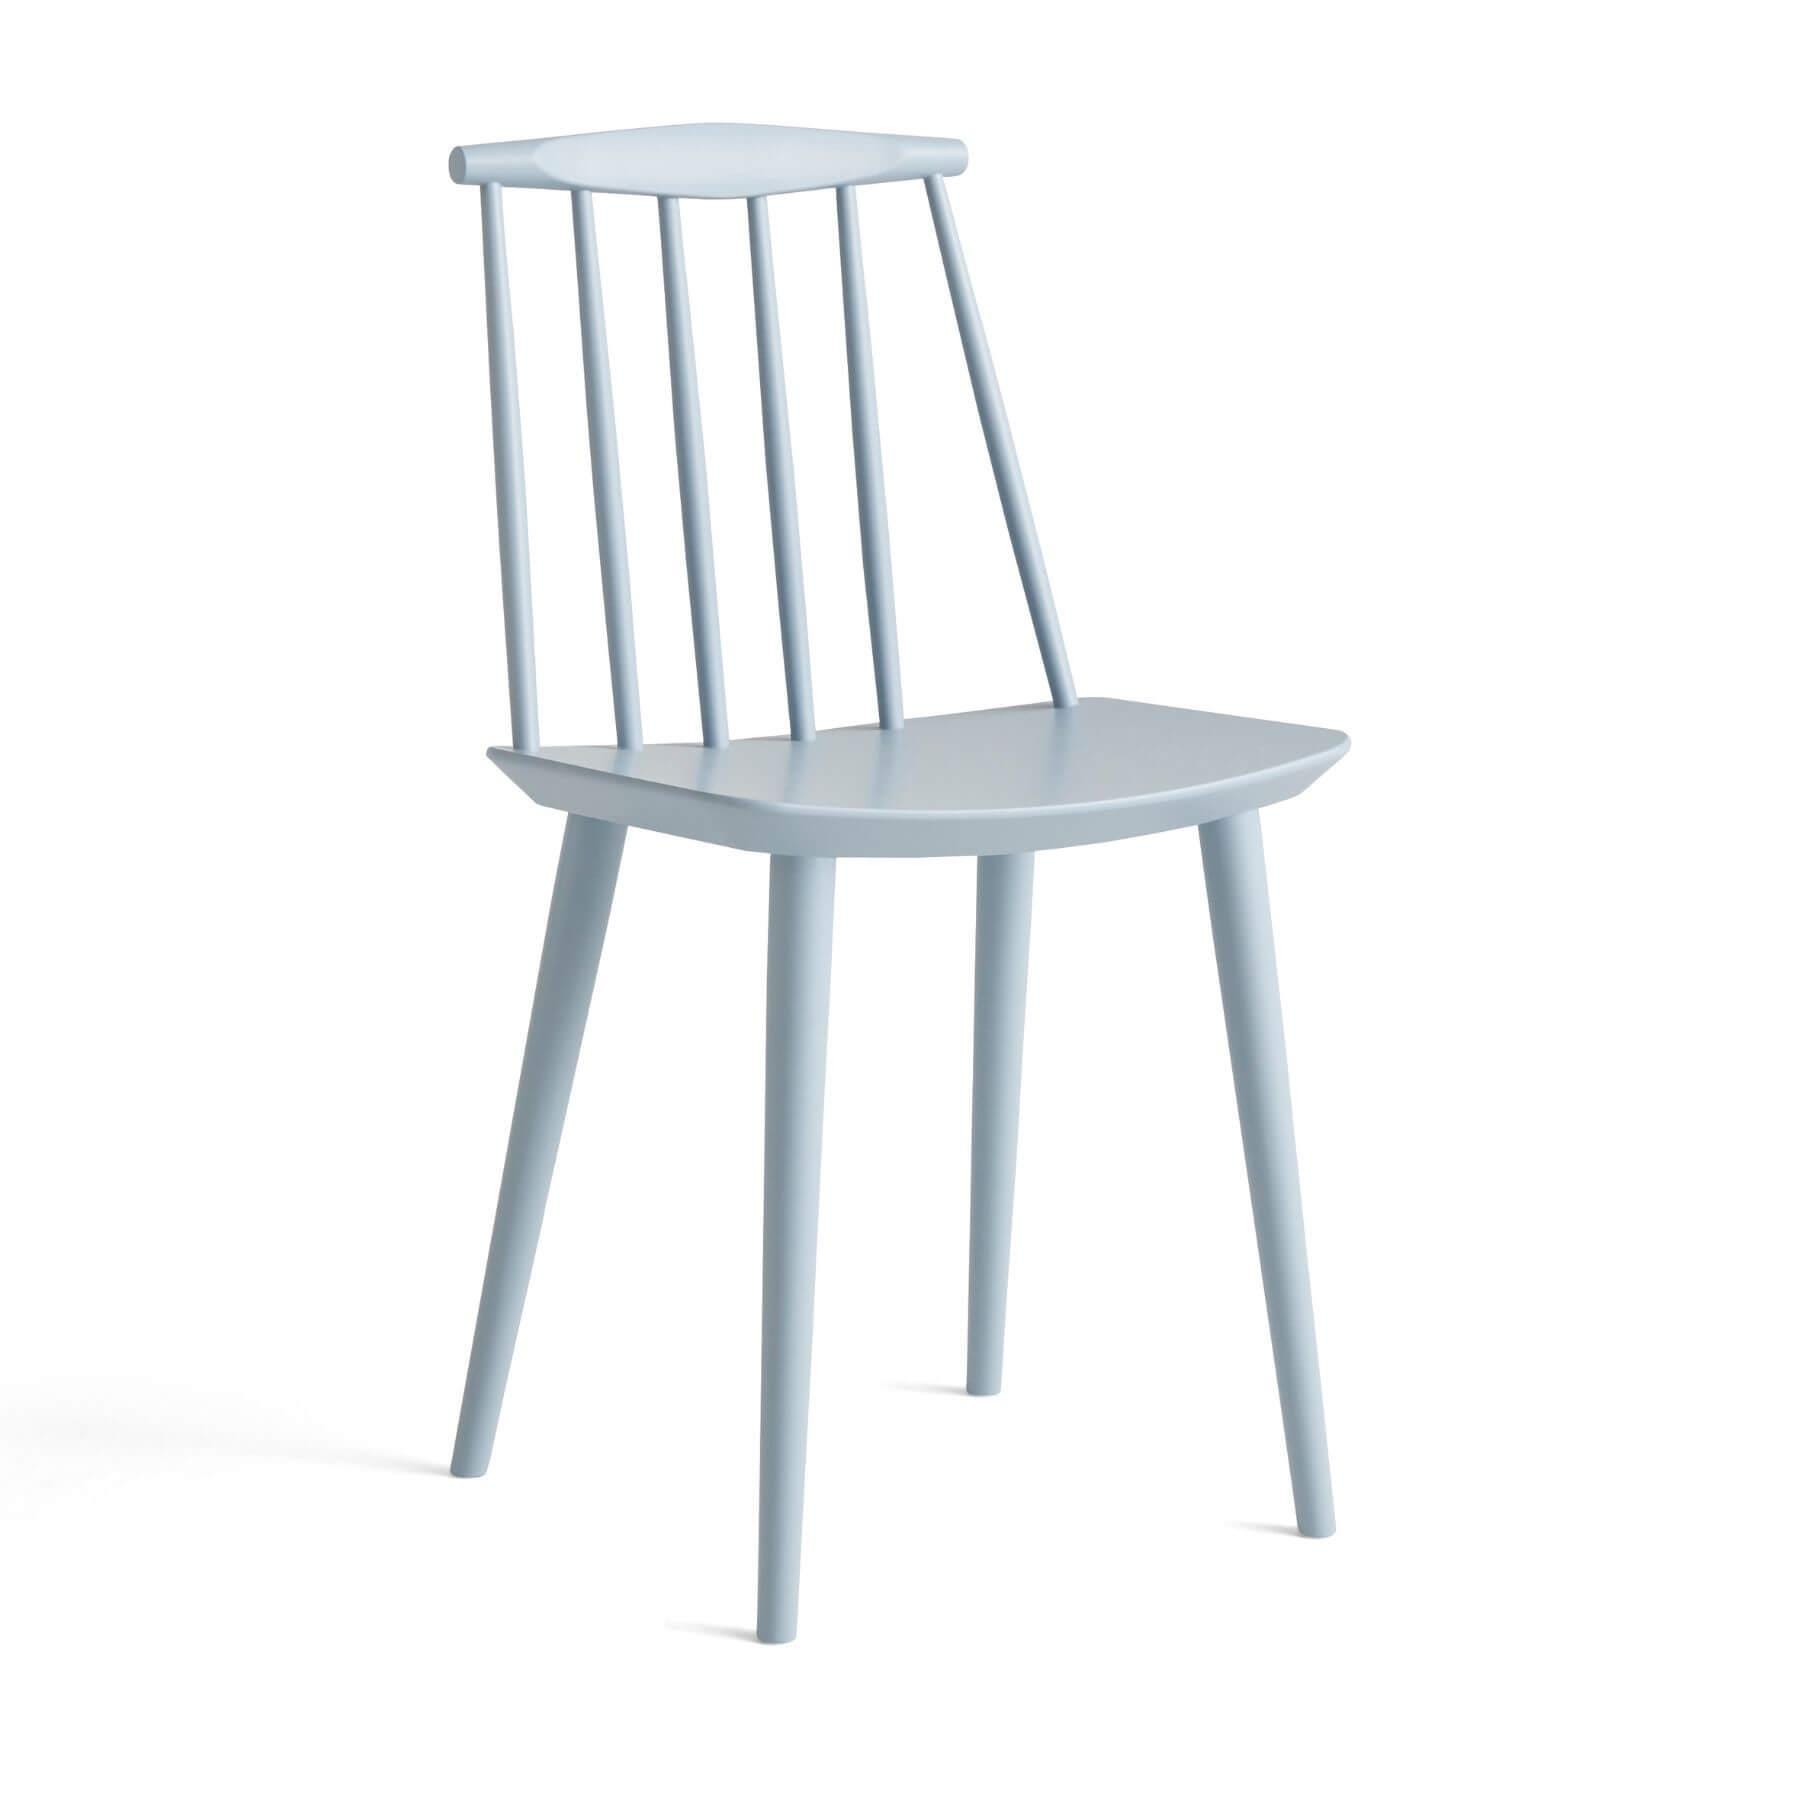 Hay Jseries 77 Dining Chair Beech Lacquered Slate Blue Standard Gliders Designer Furniture From Holloways Of Ludlow